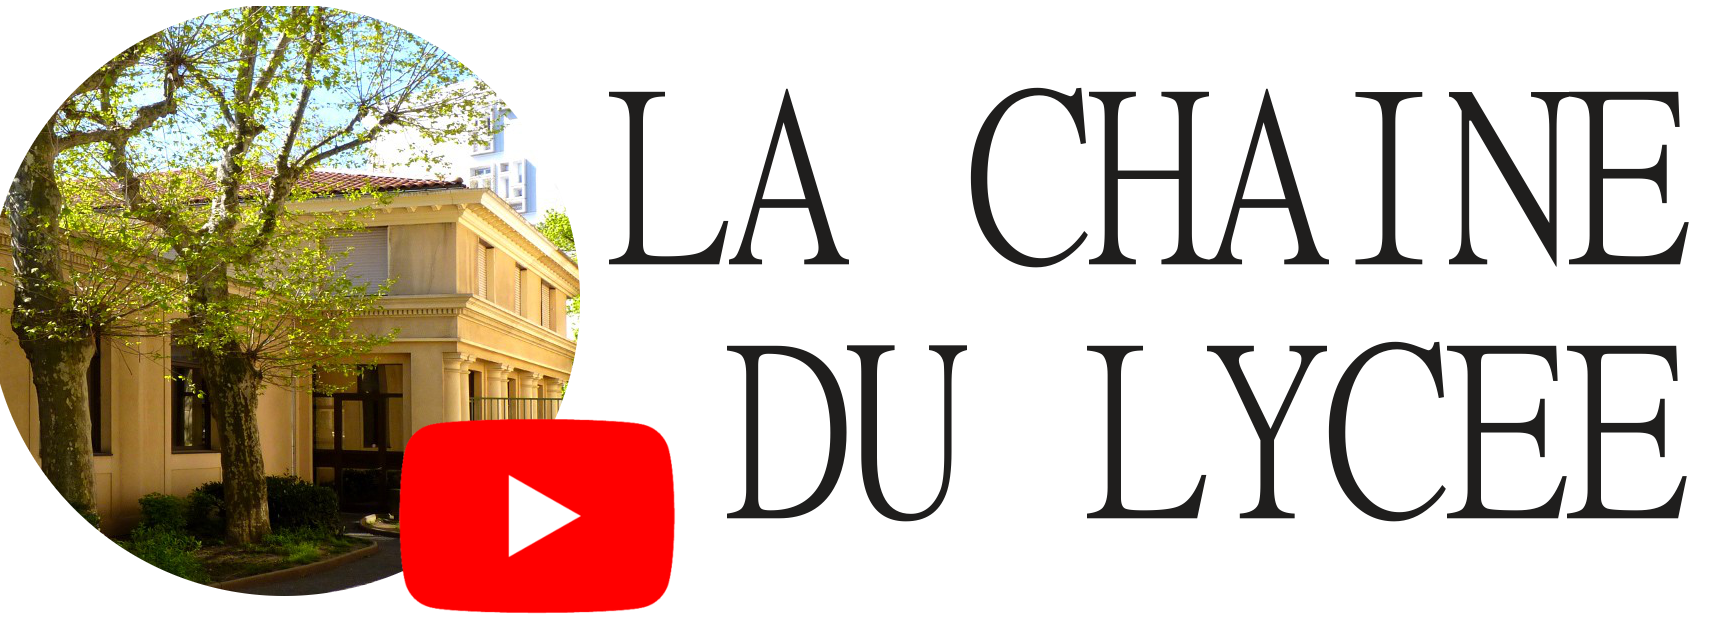 LOGO CHAINE LYCEE ACCUEIL fond.png